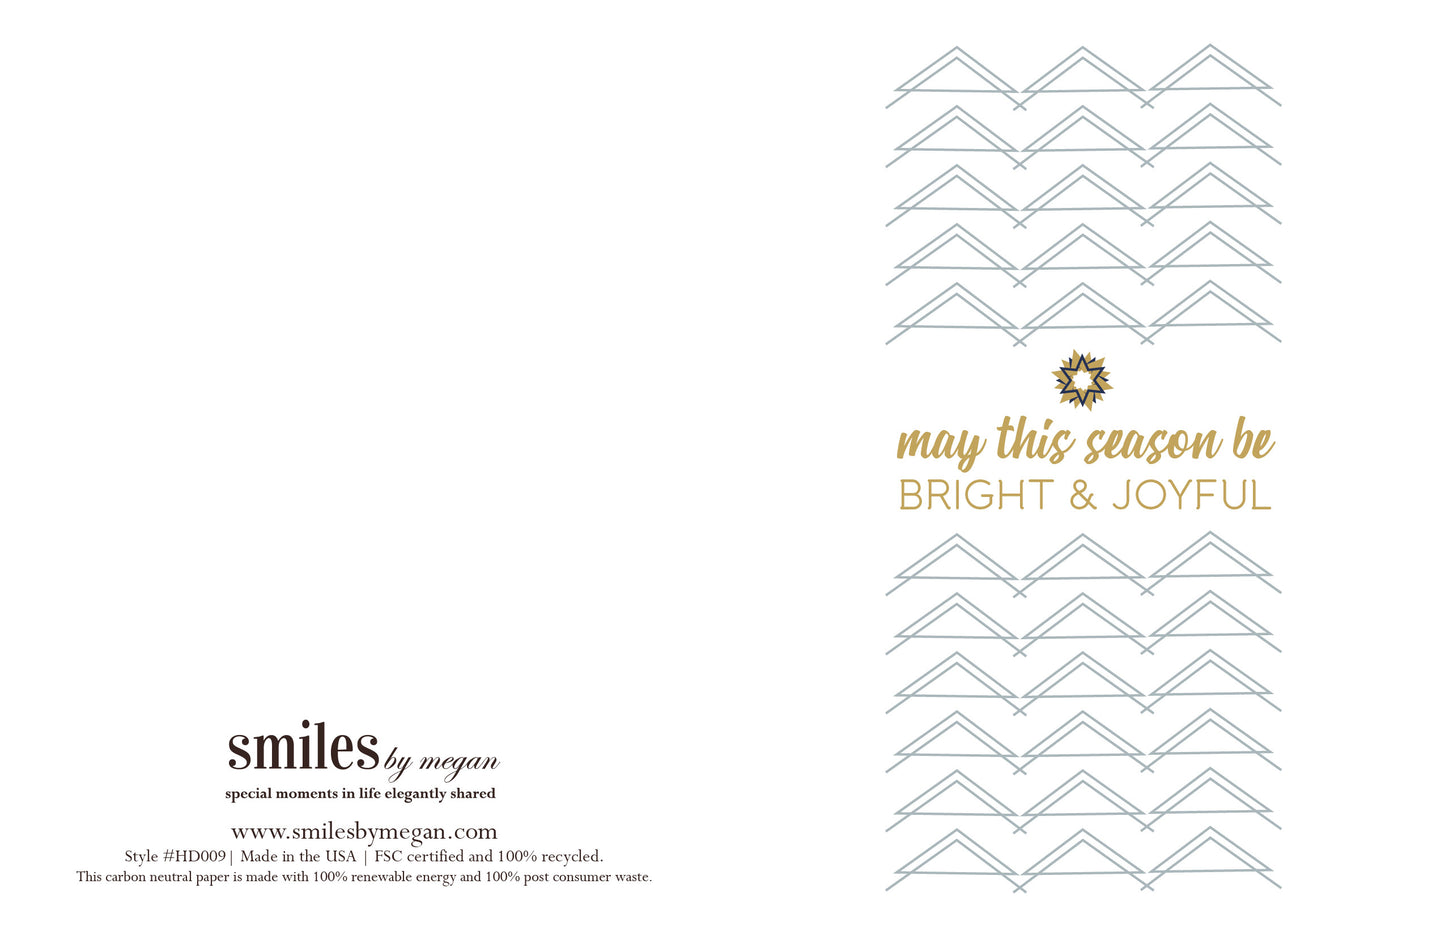 greetings for friends | may this season be bright and joyful holiday card